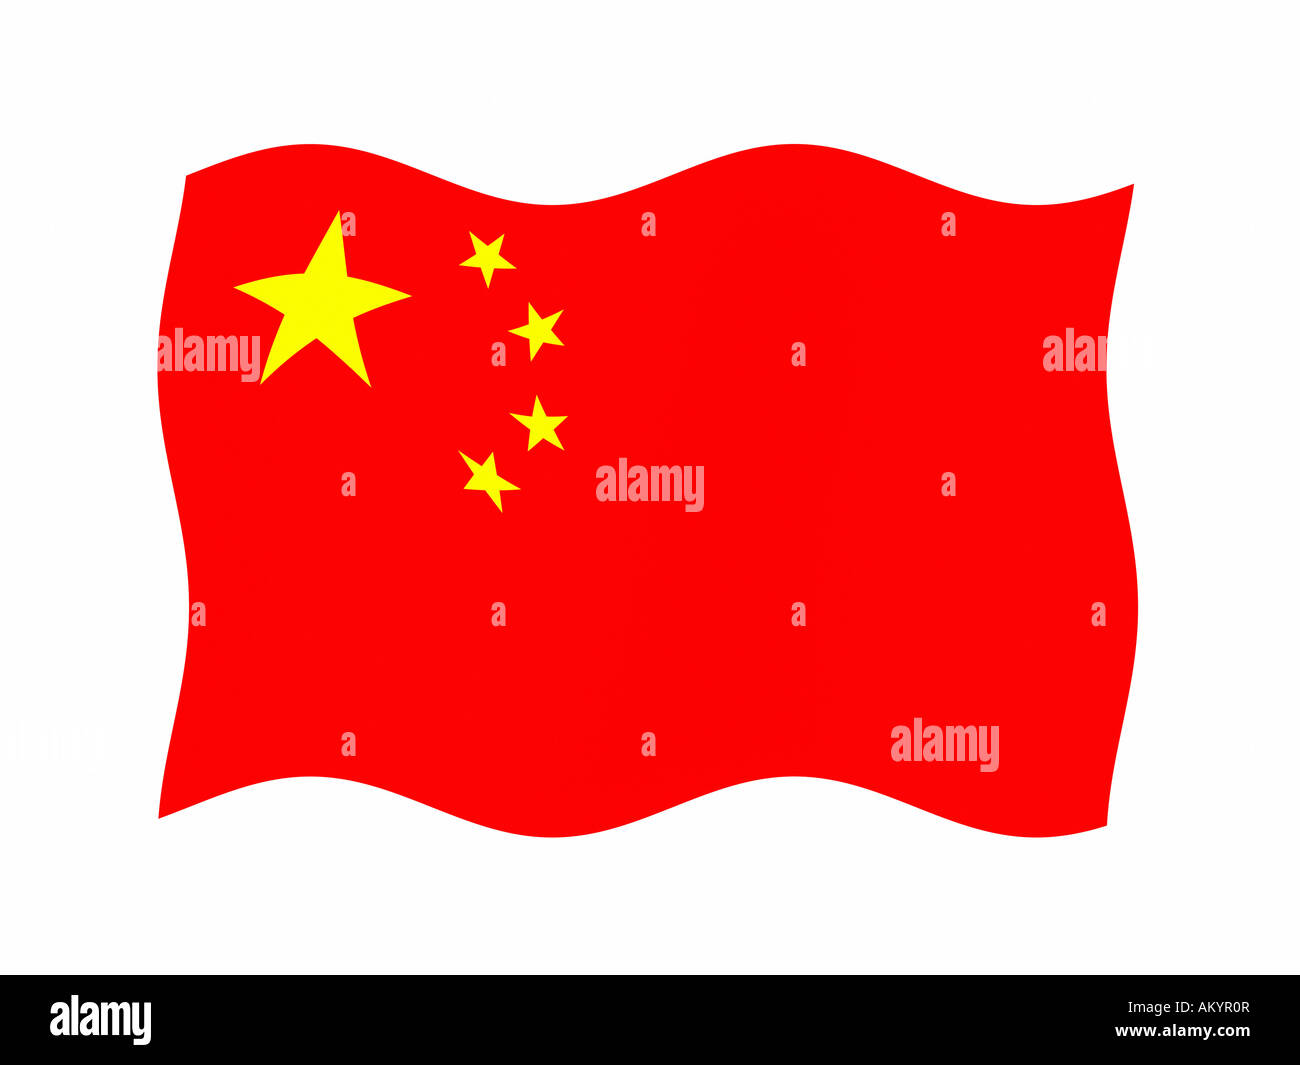 The flag of China - graphic Stock Photo